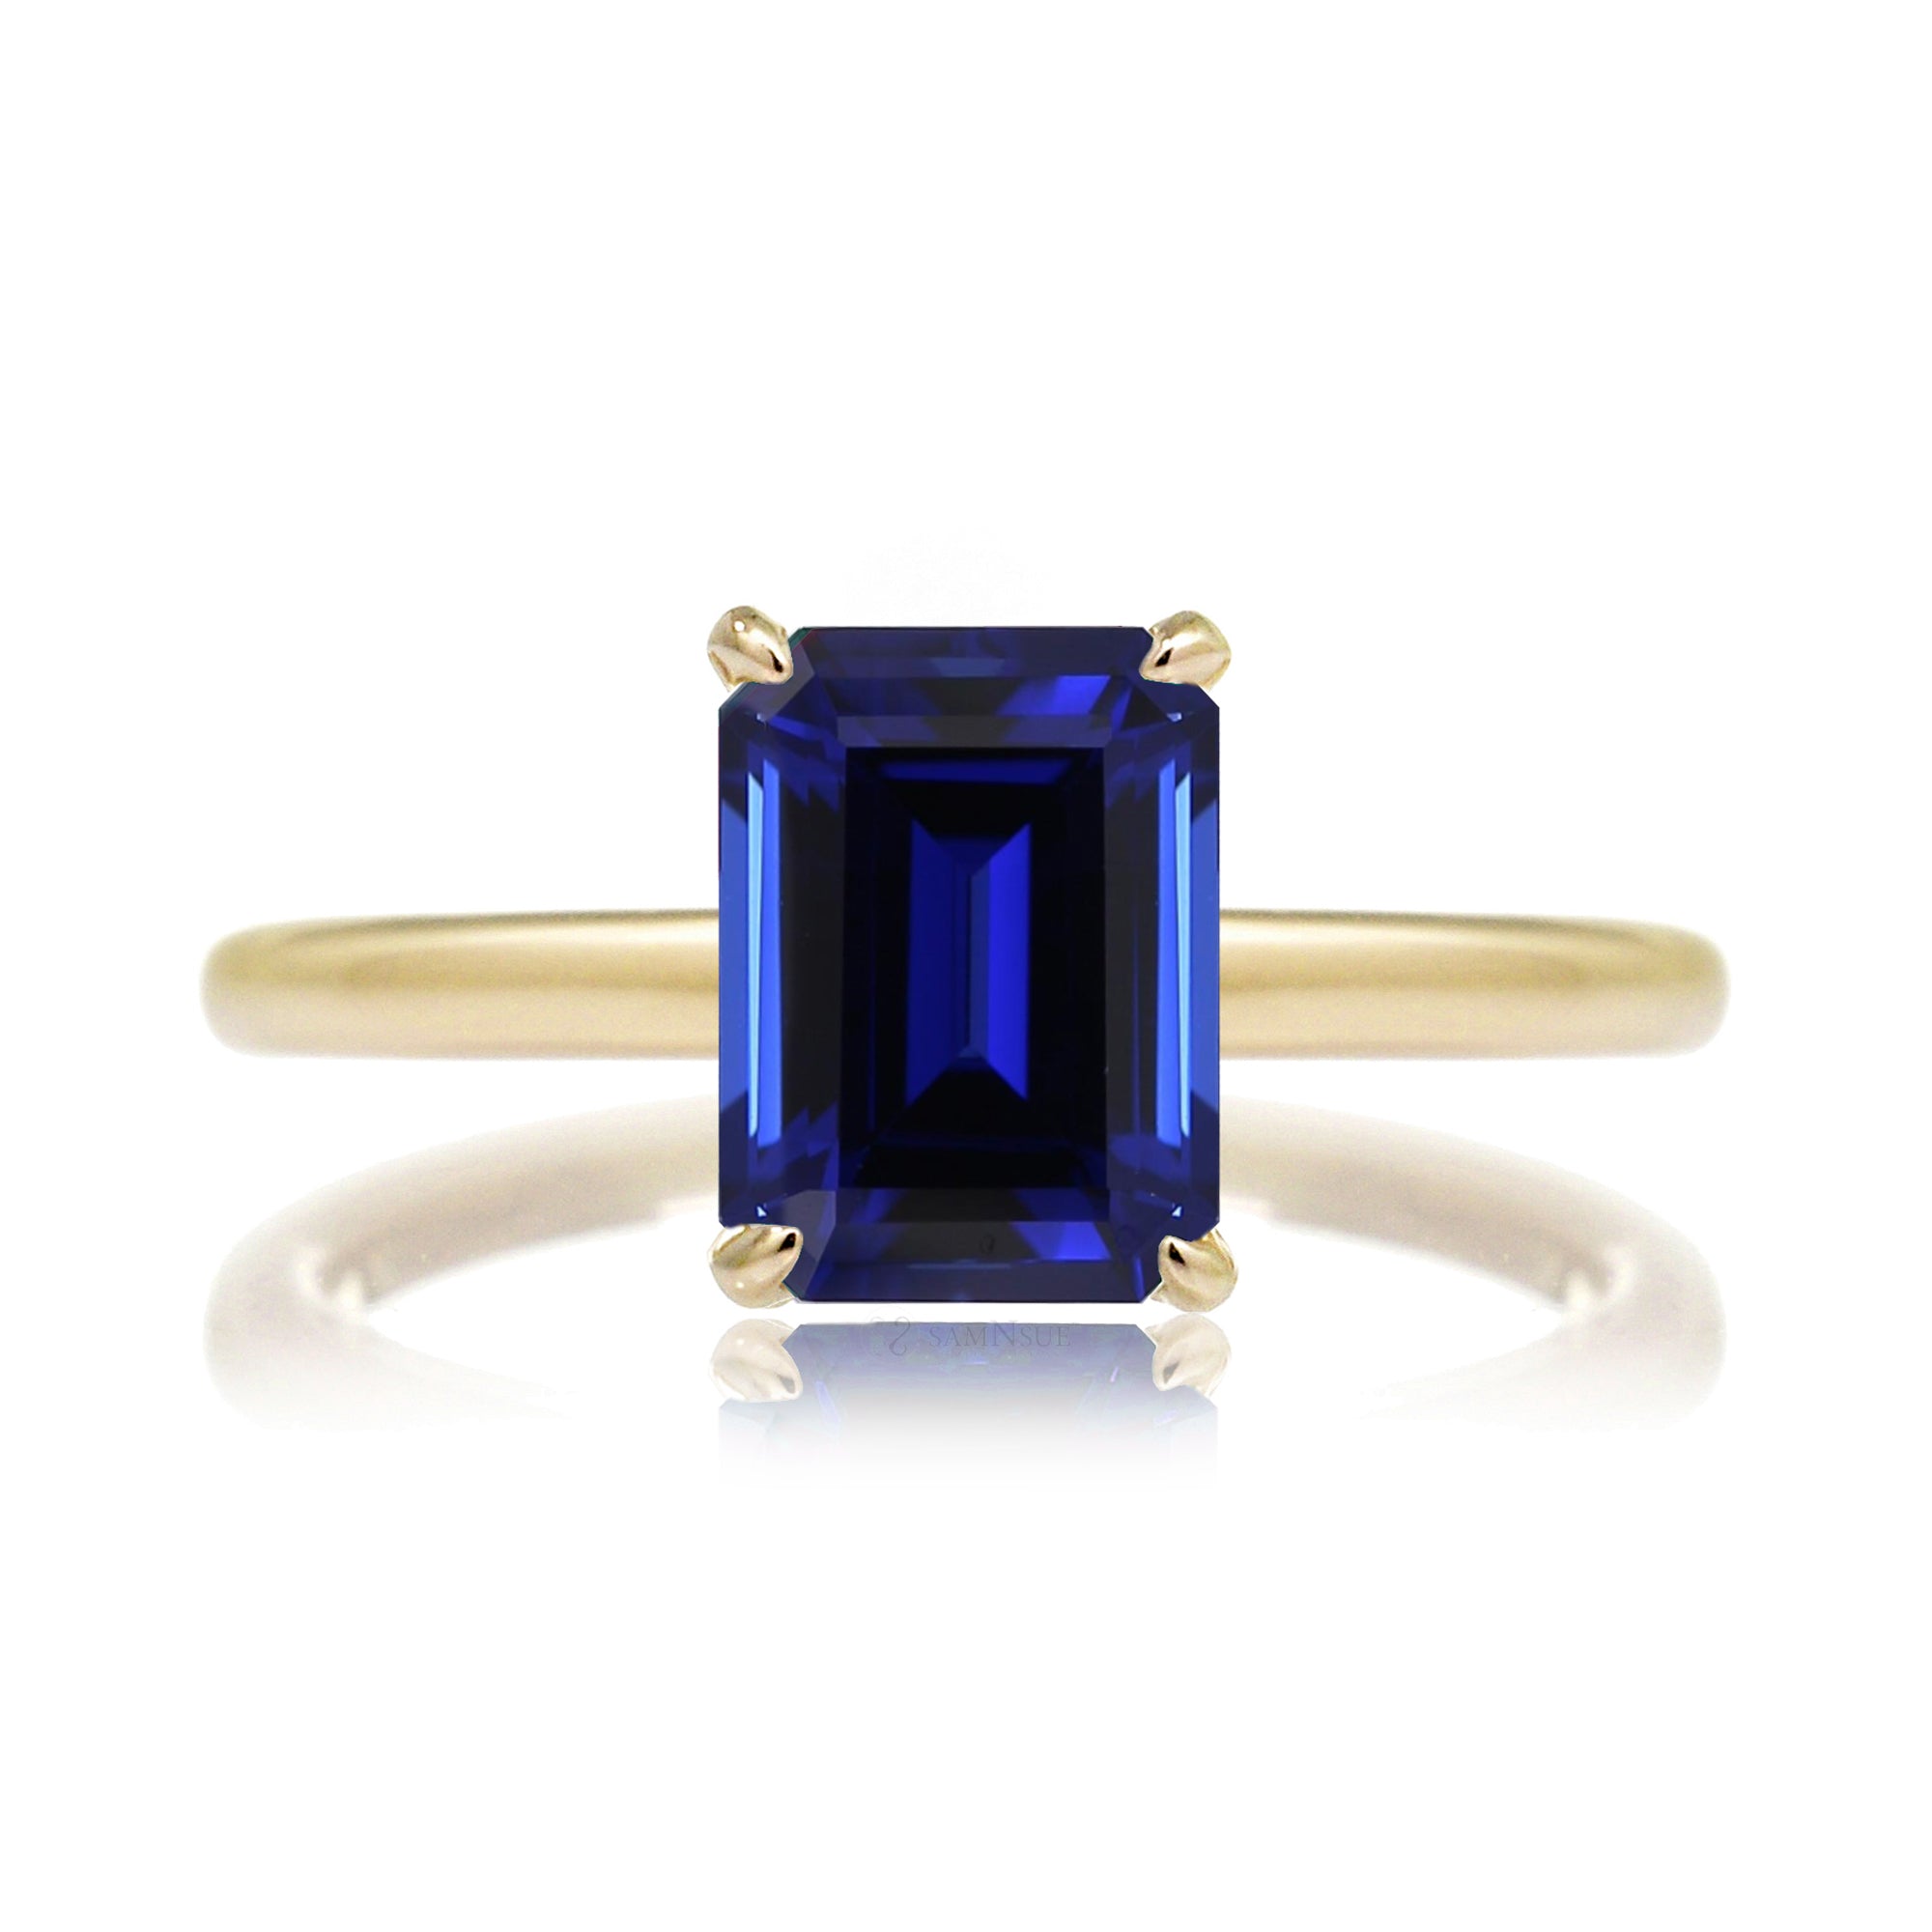 Emerald step cut blue sapphire engagement solitaire ring with hidden diamond halo in yellow gold